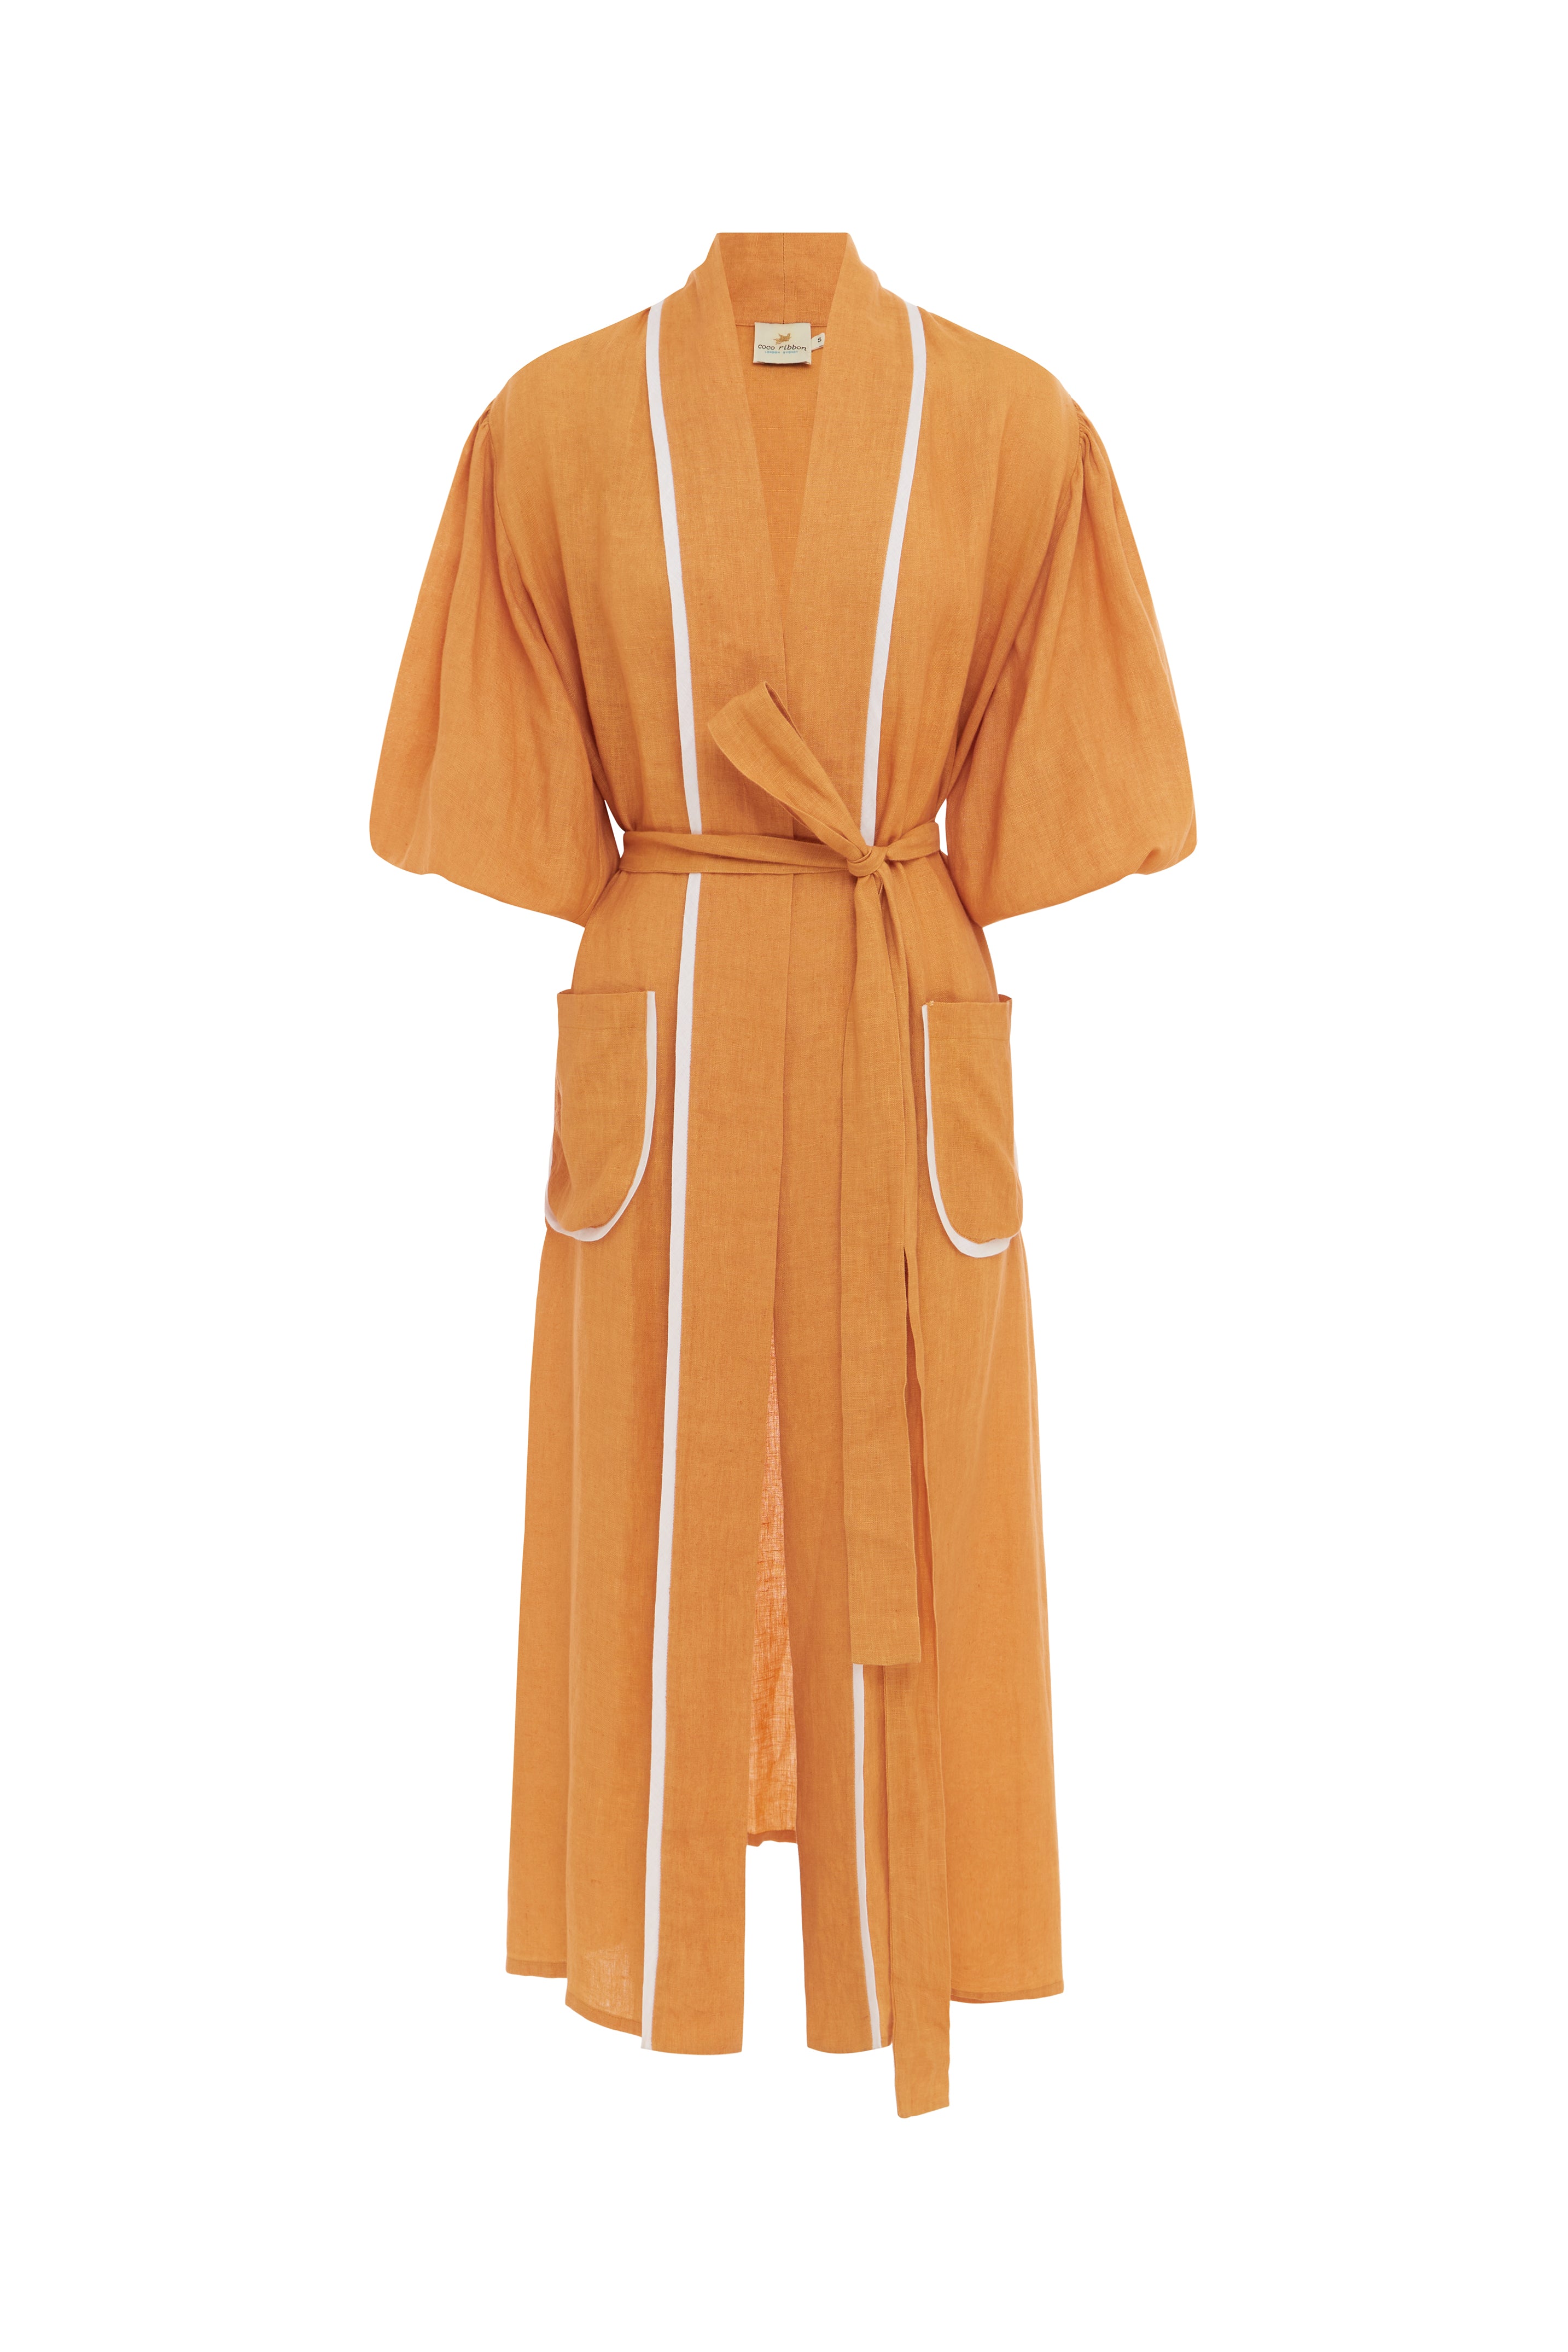 Cape Amarin Beach-to-Bar Robe in Solid Toffee